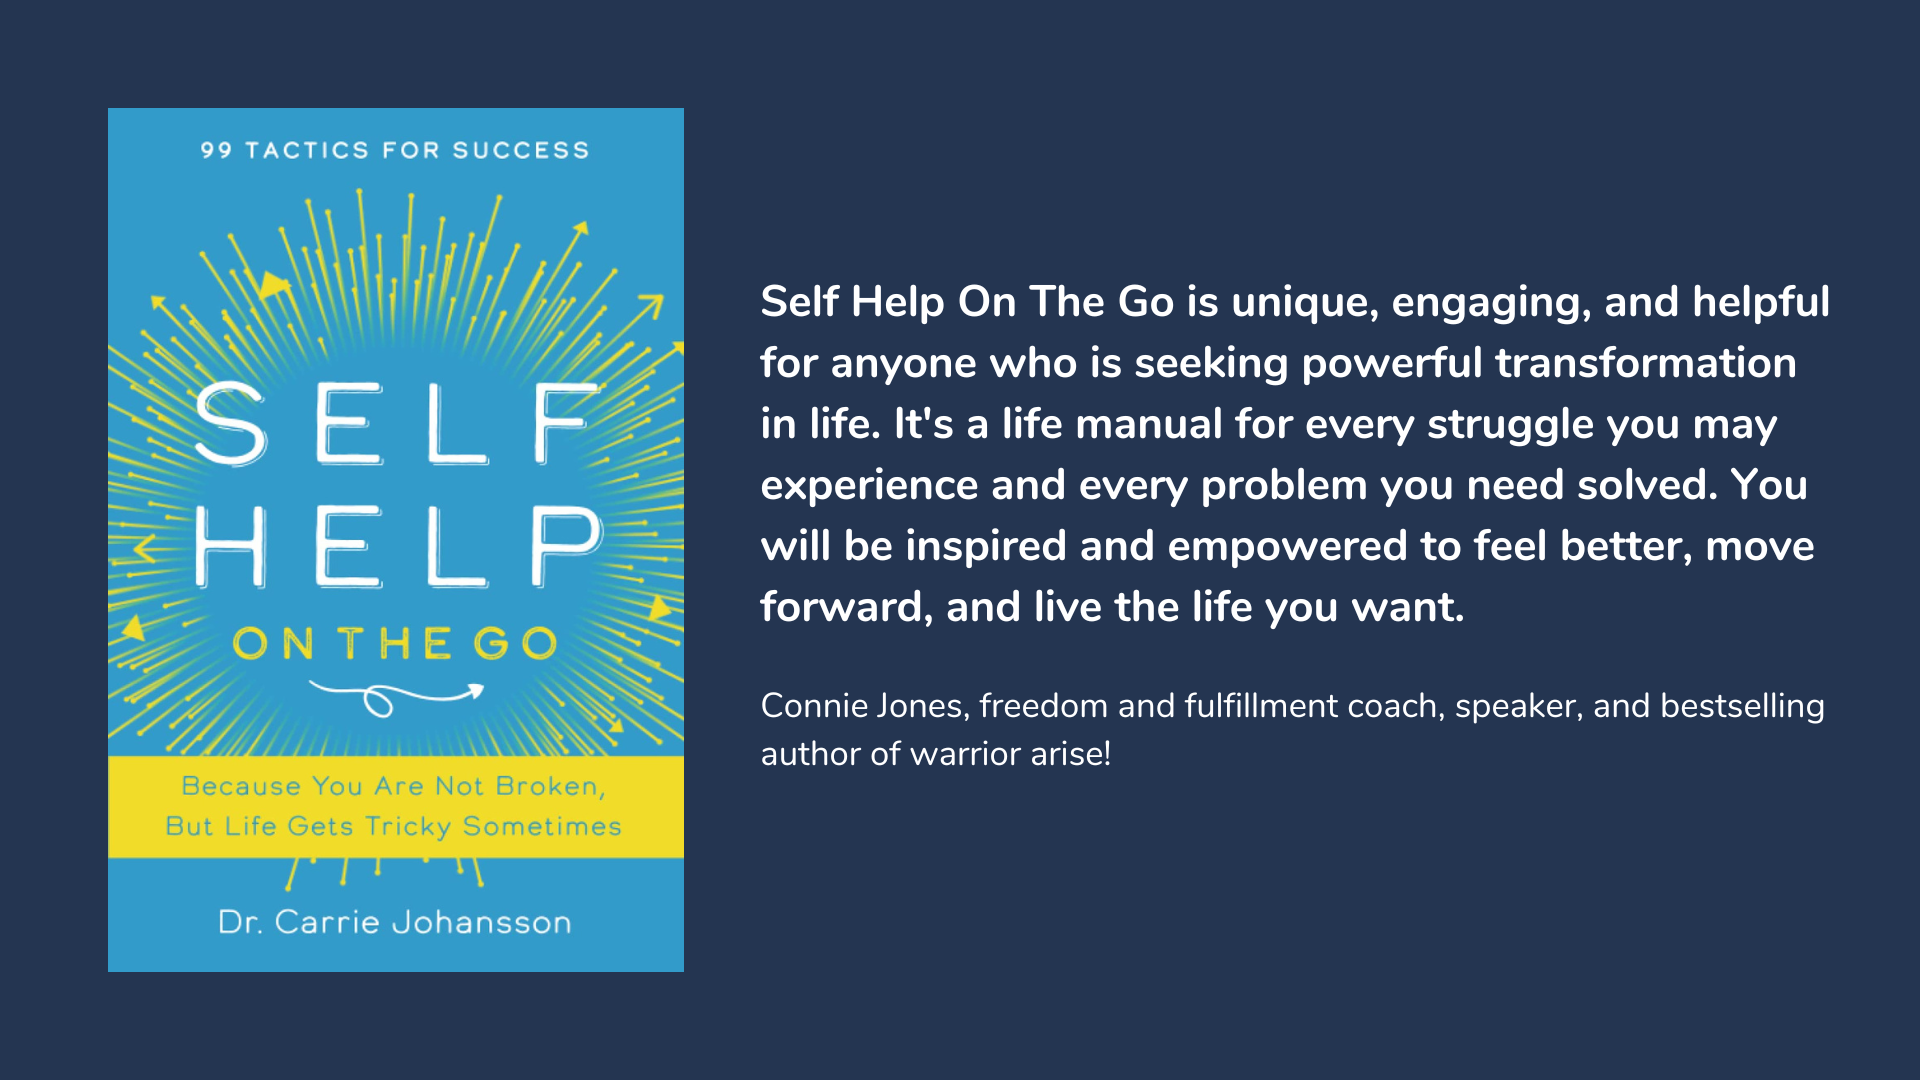 Self-Help On The Go: Because You Are Not Broken, But Life Gets Tricky Sometimes, book cover and description.